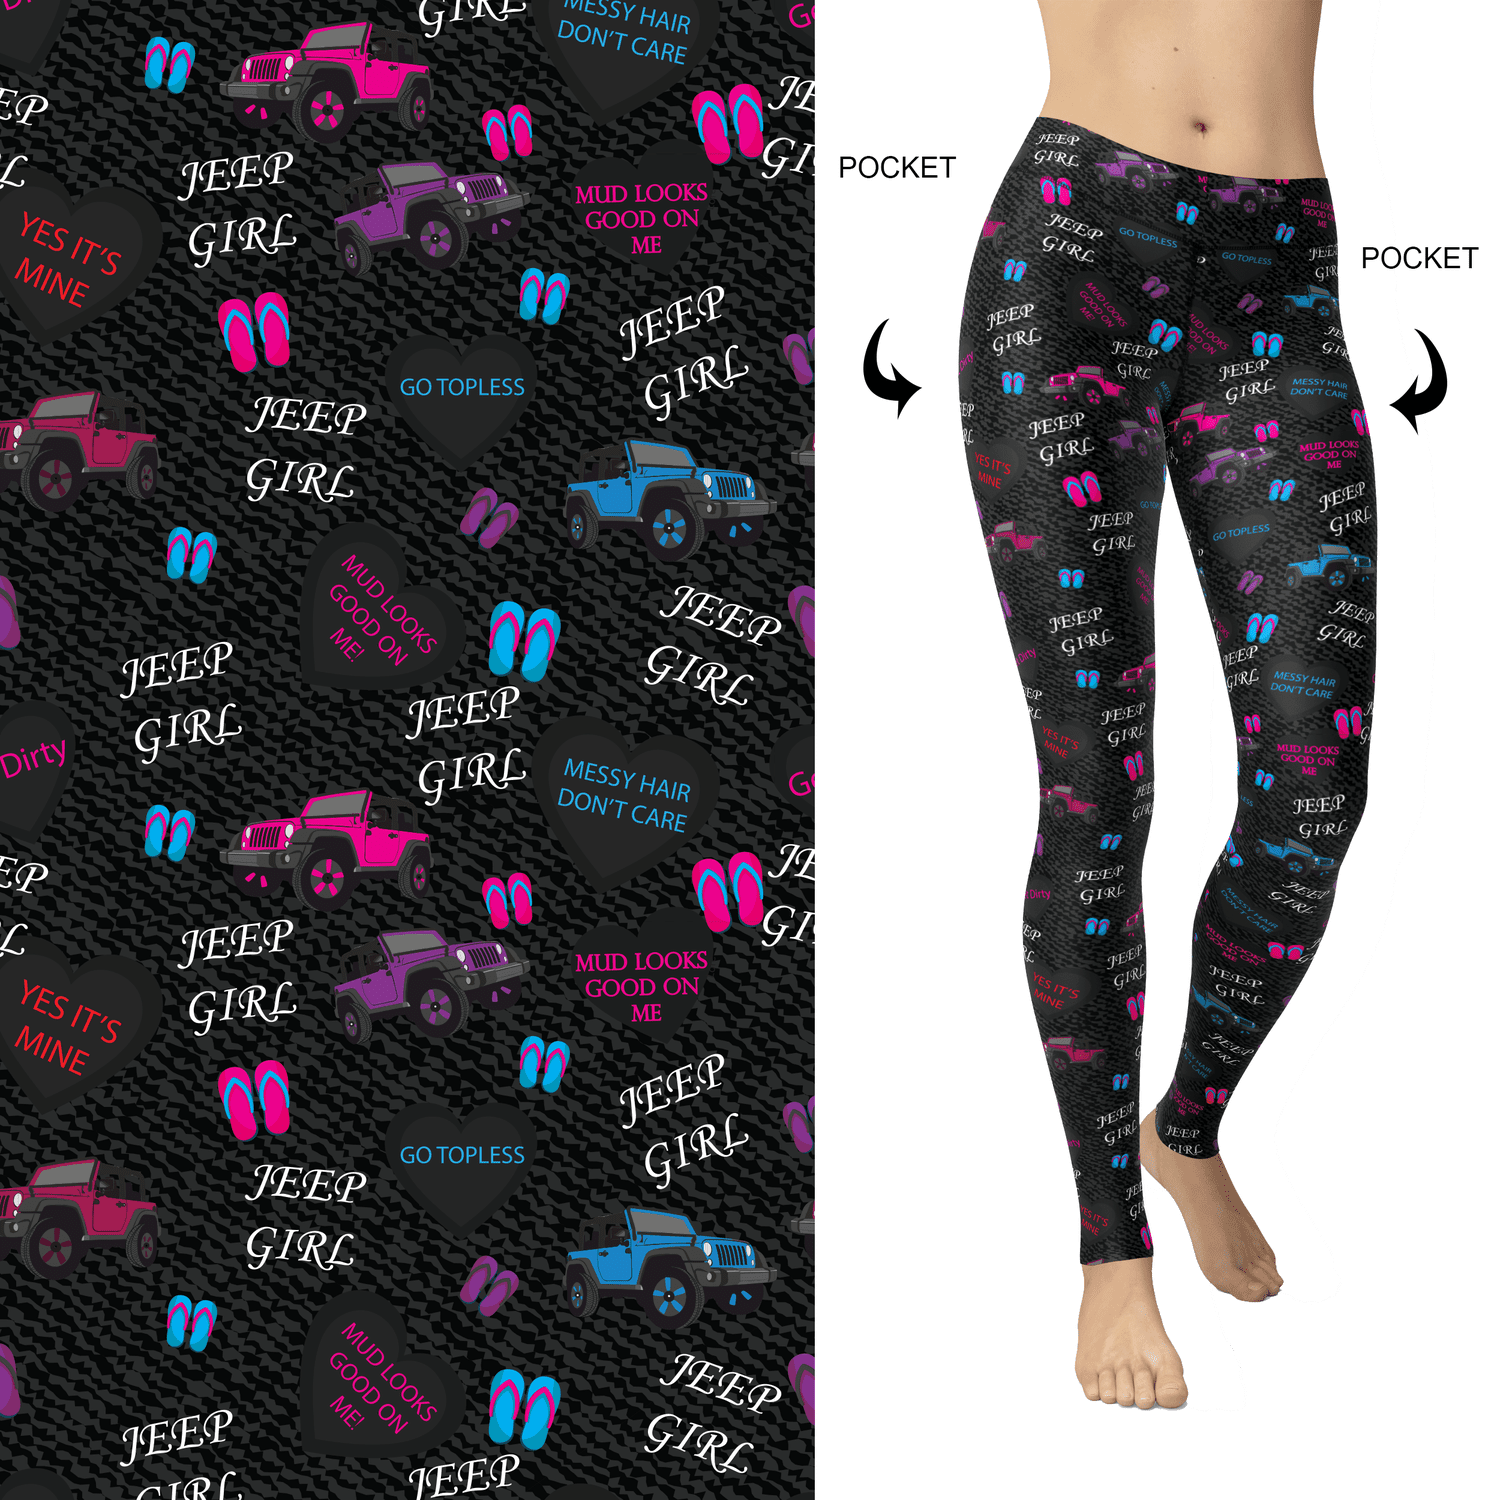 Black Jeeper Girl Leggings with Pockets